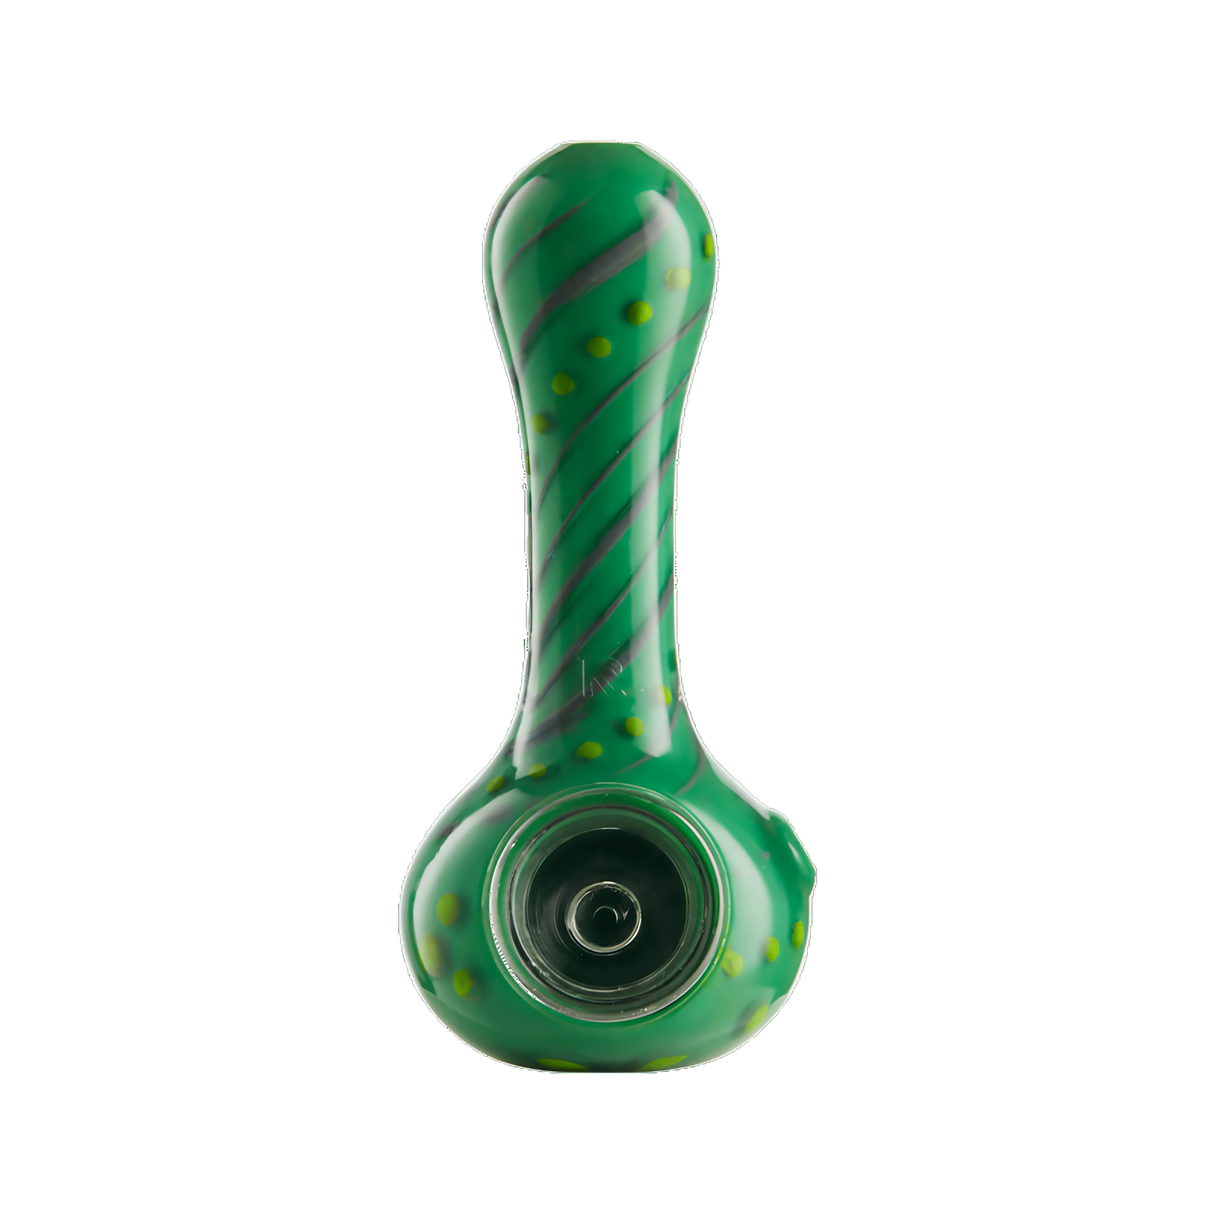 Eyce ORAFLEX Floral Spoon Pipe in green with yellow accents, durable silicone design, front view